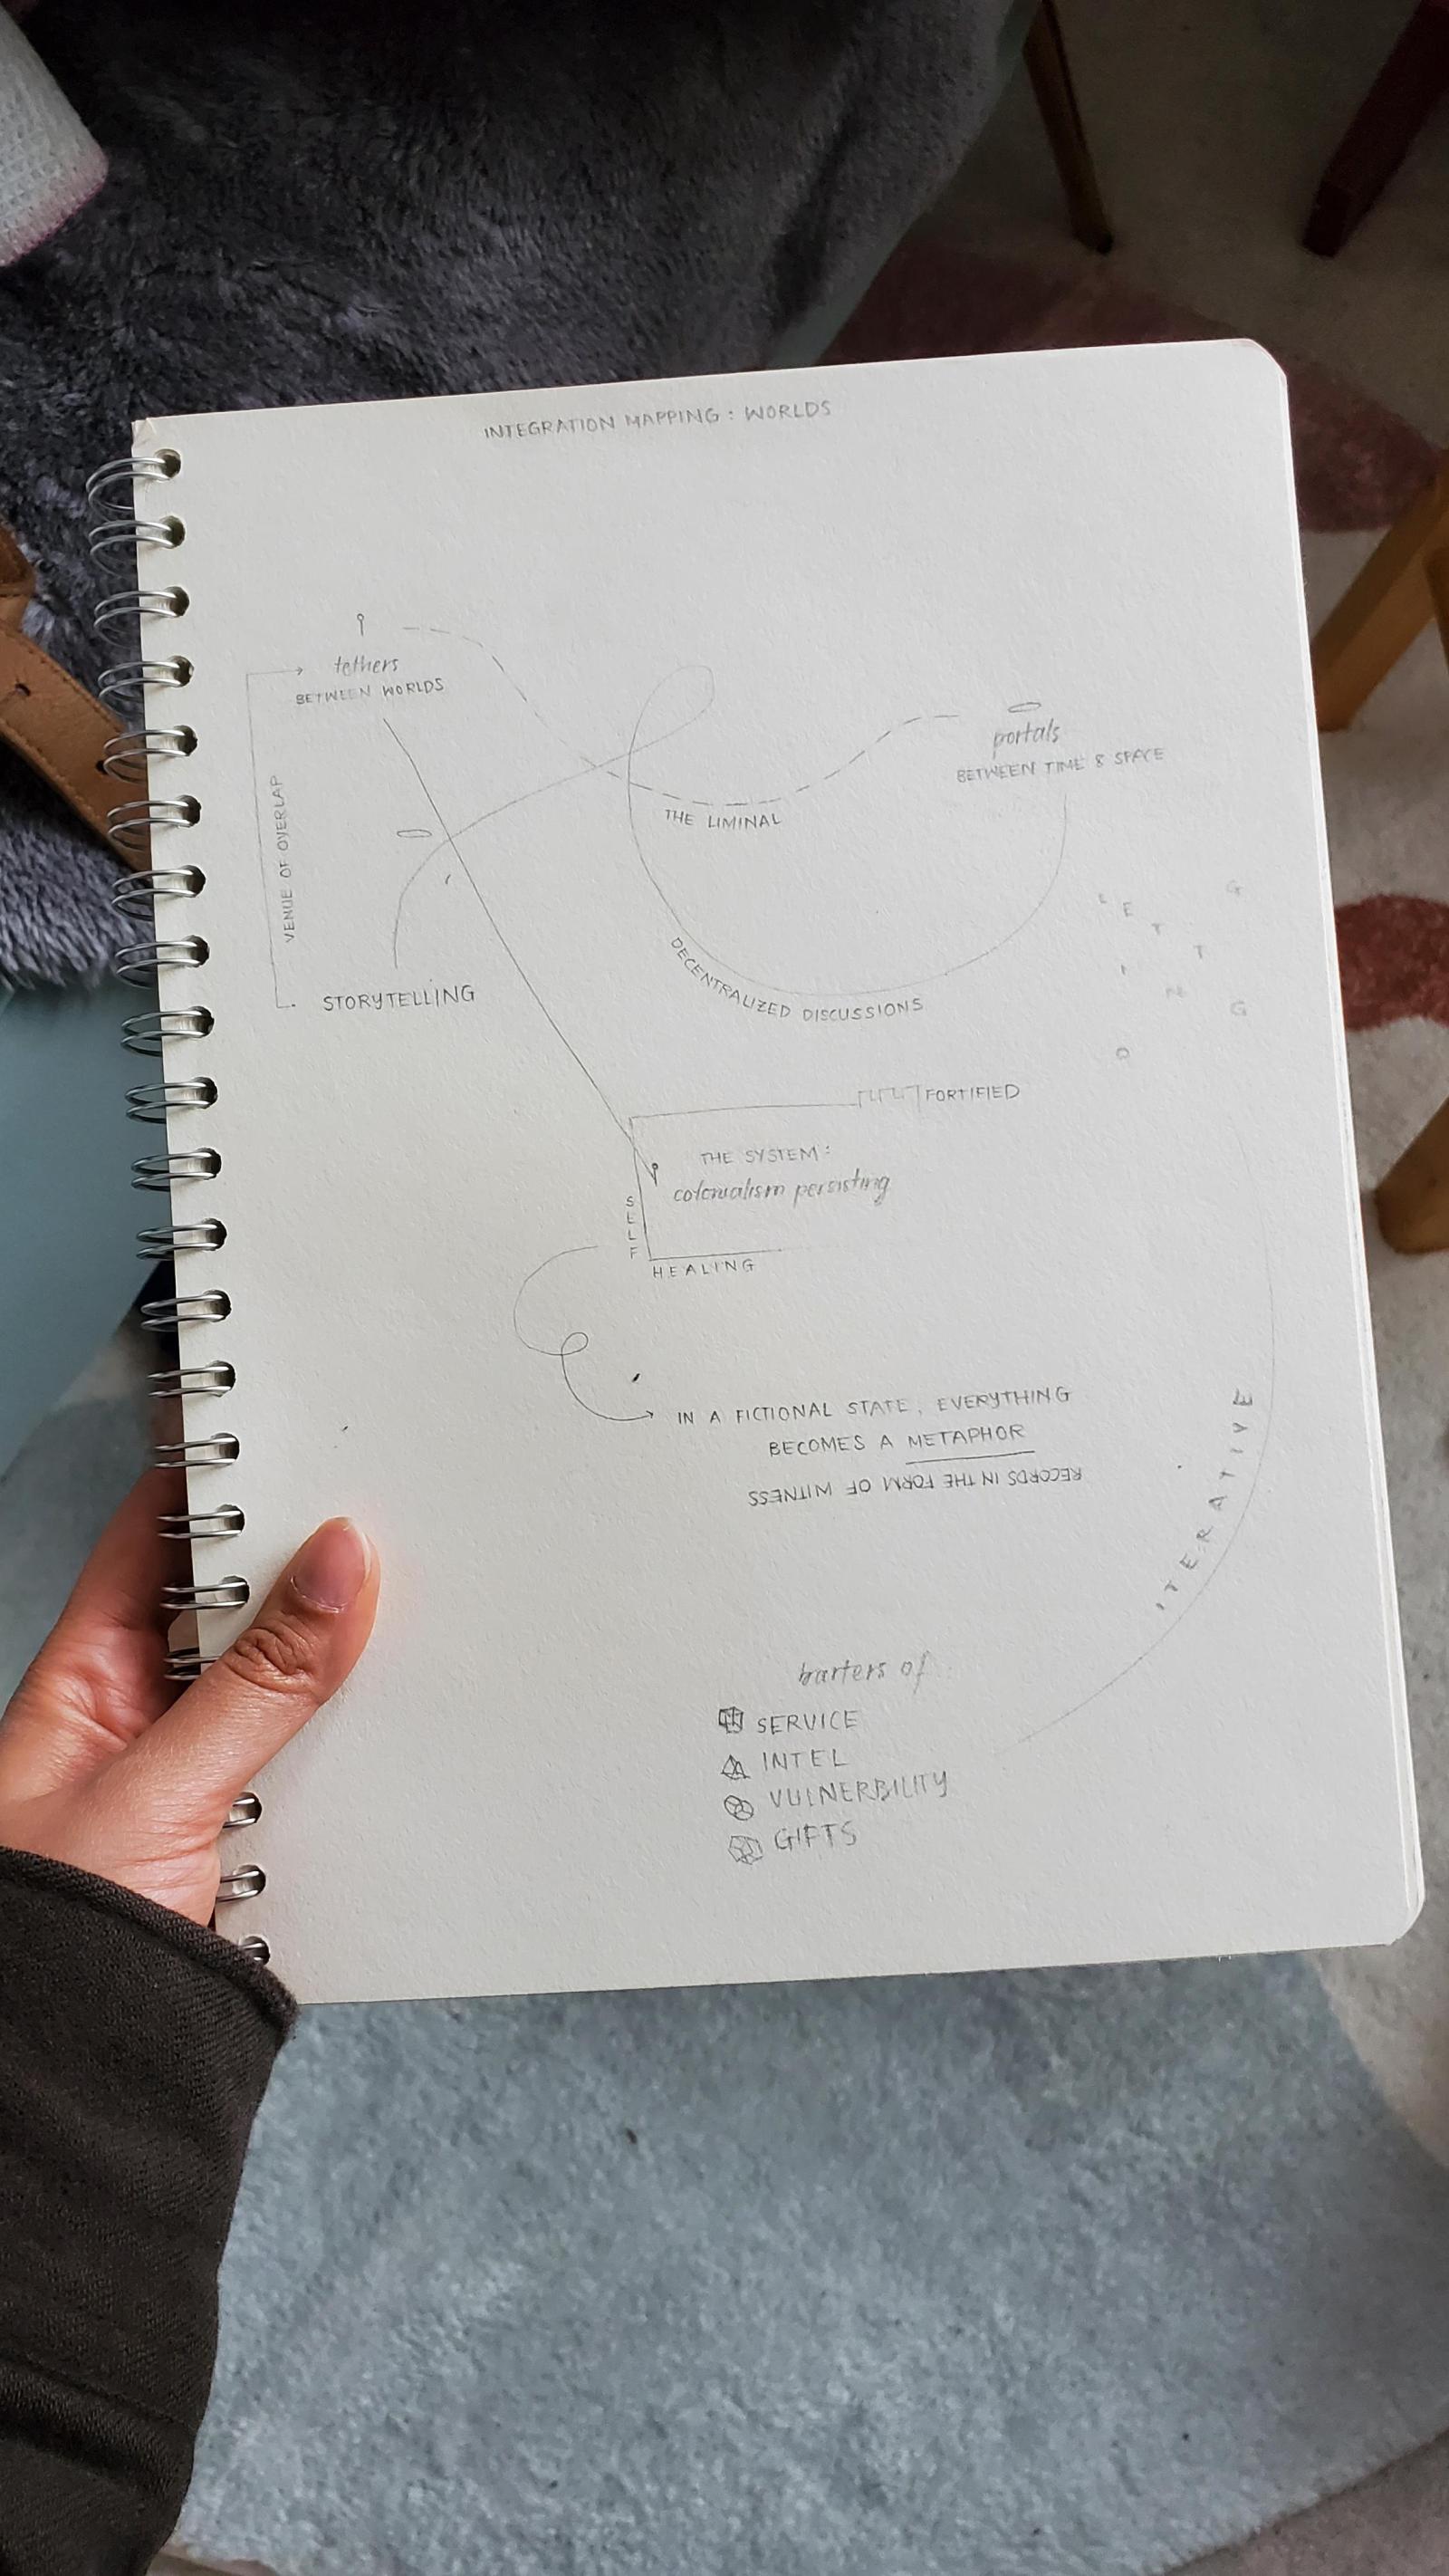 A hand holding a spiral bound notebook open to a page that includes a mind map of words and arrows